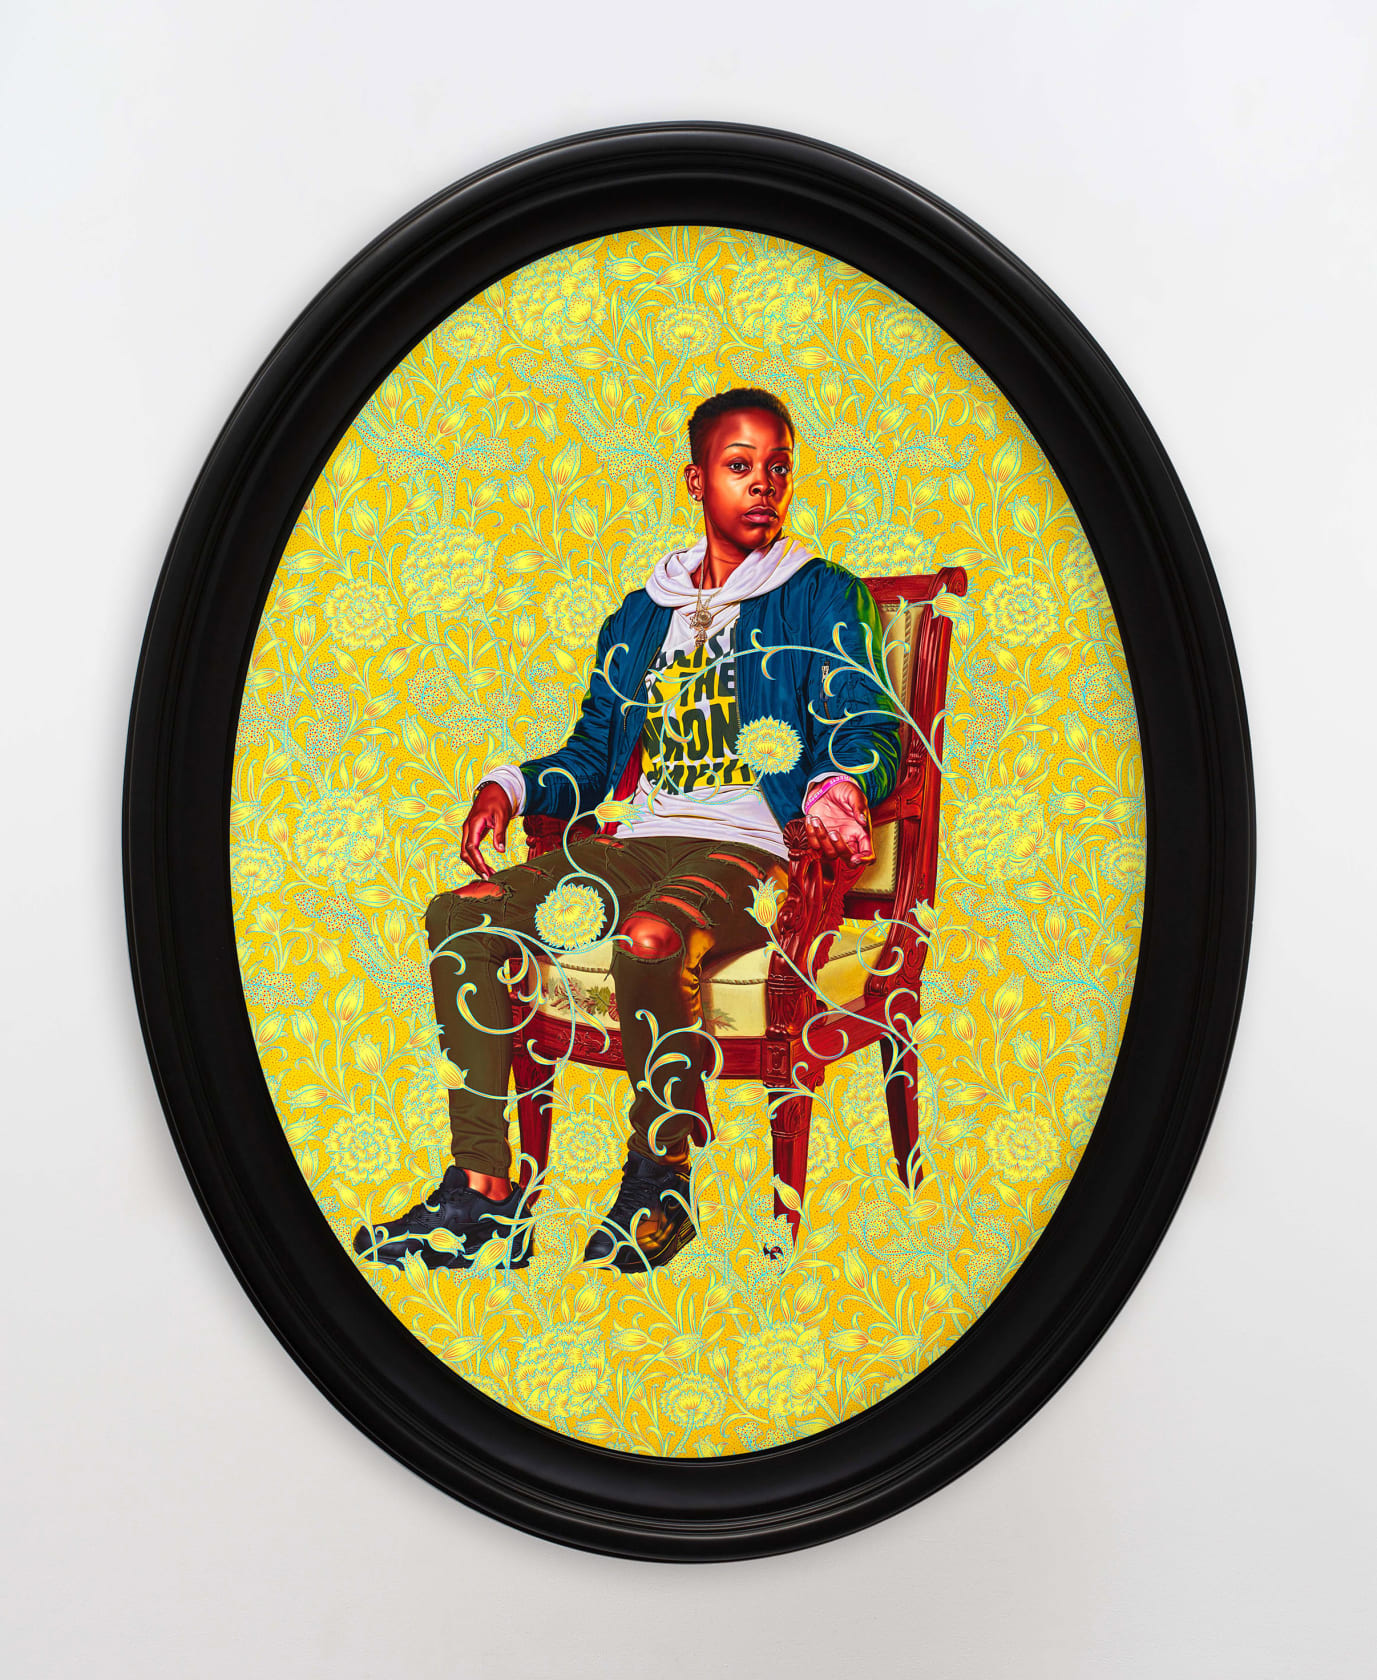 Kehinde Wiley | The Yellow Wallpaper, William Morrison Gallery, London, England February 22 - July 12 2020 | 6